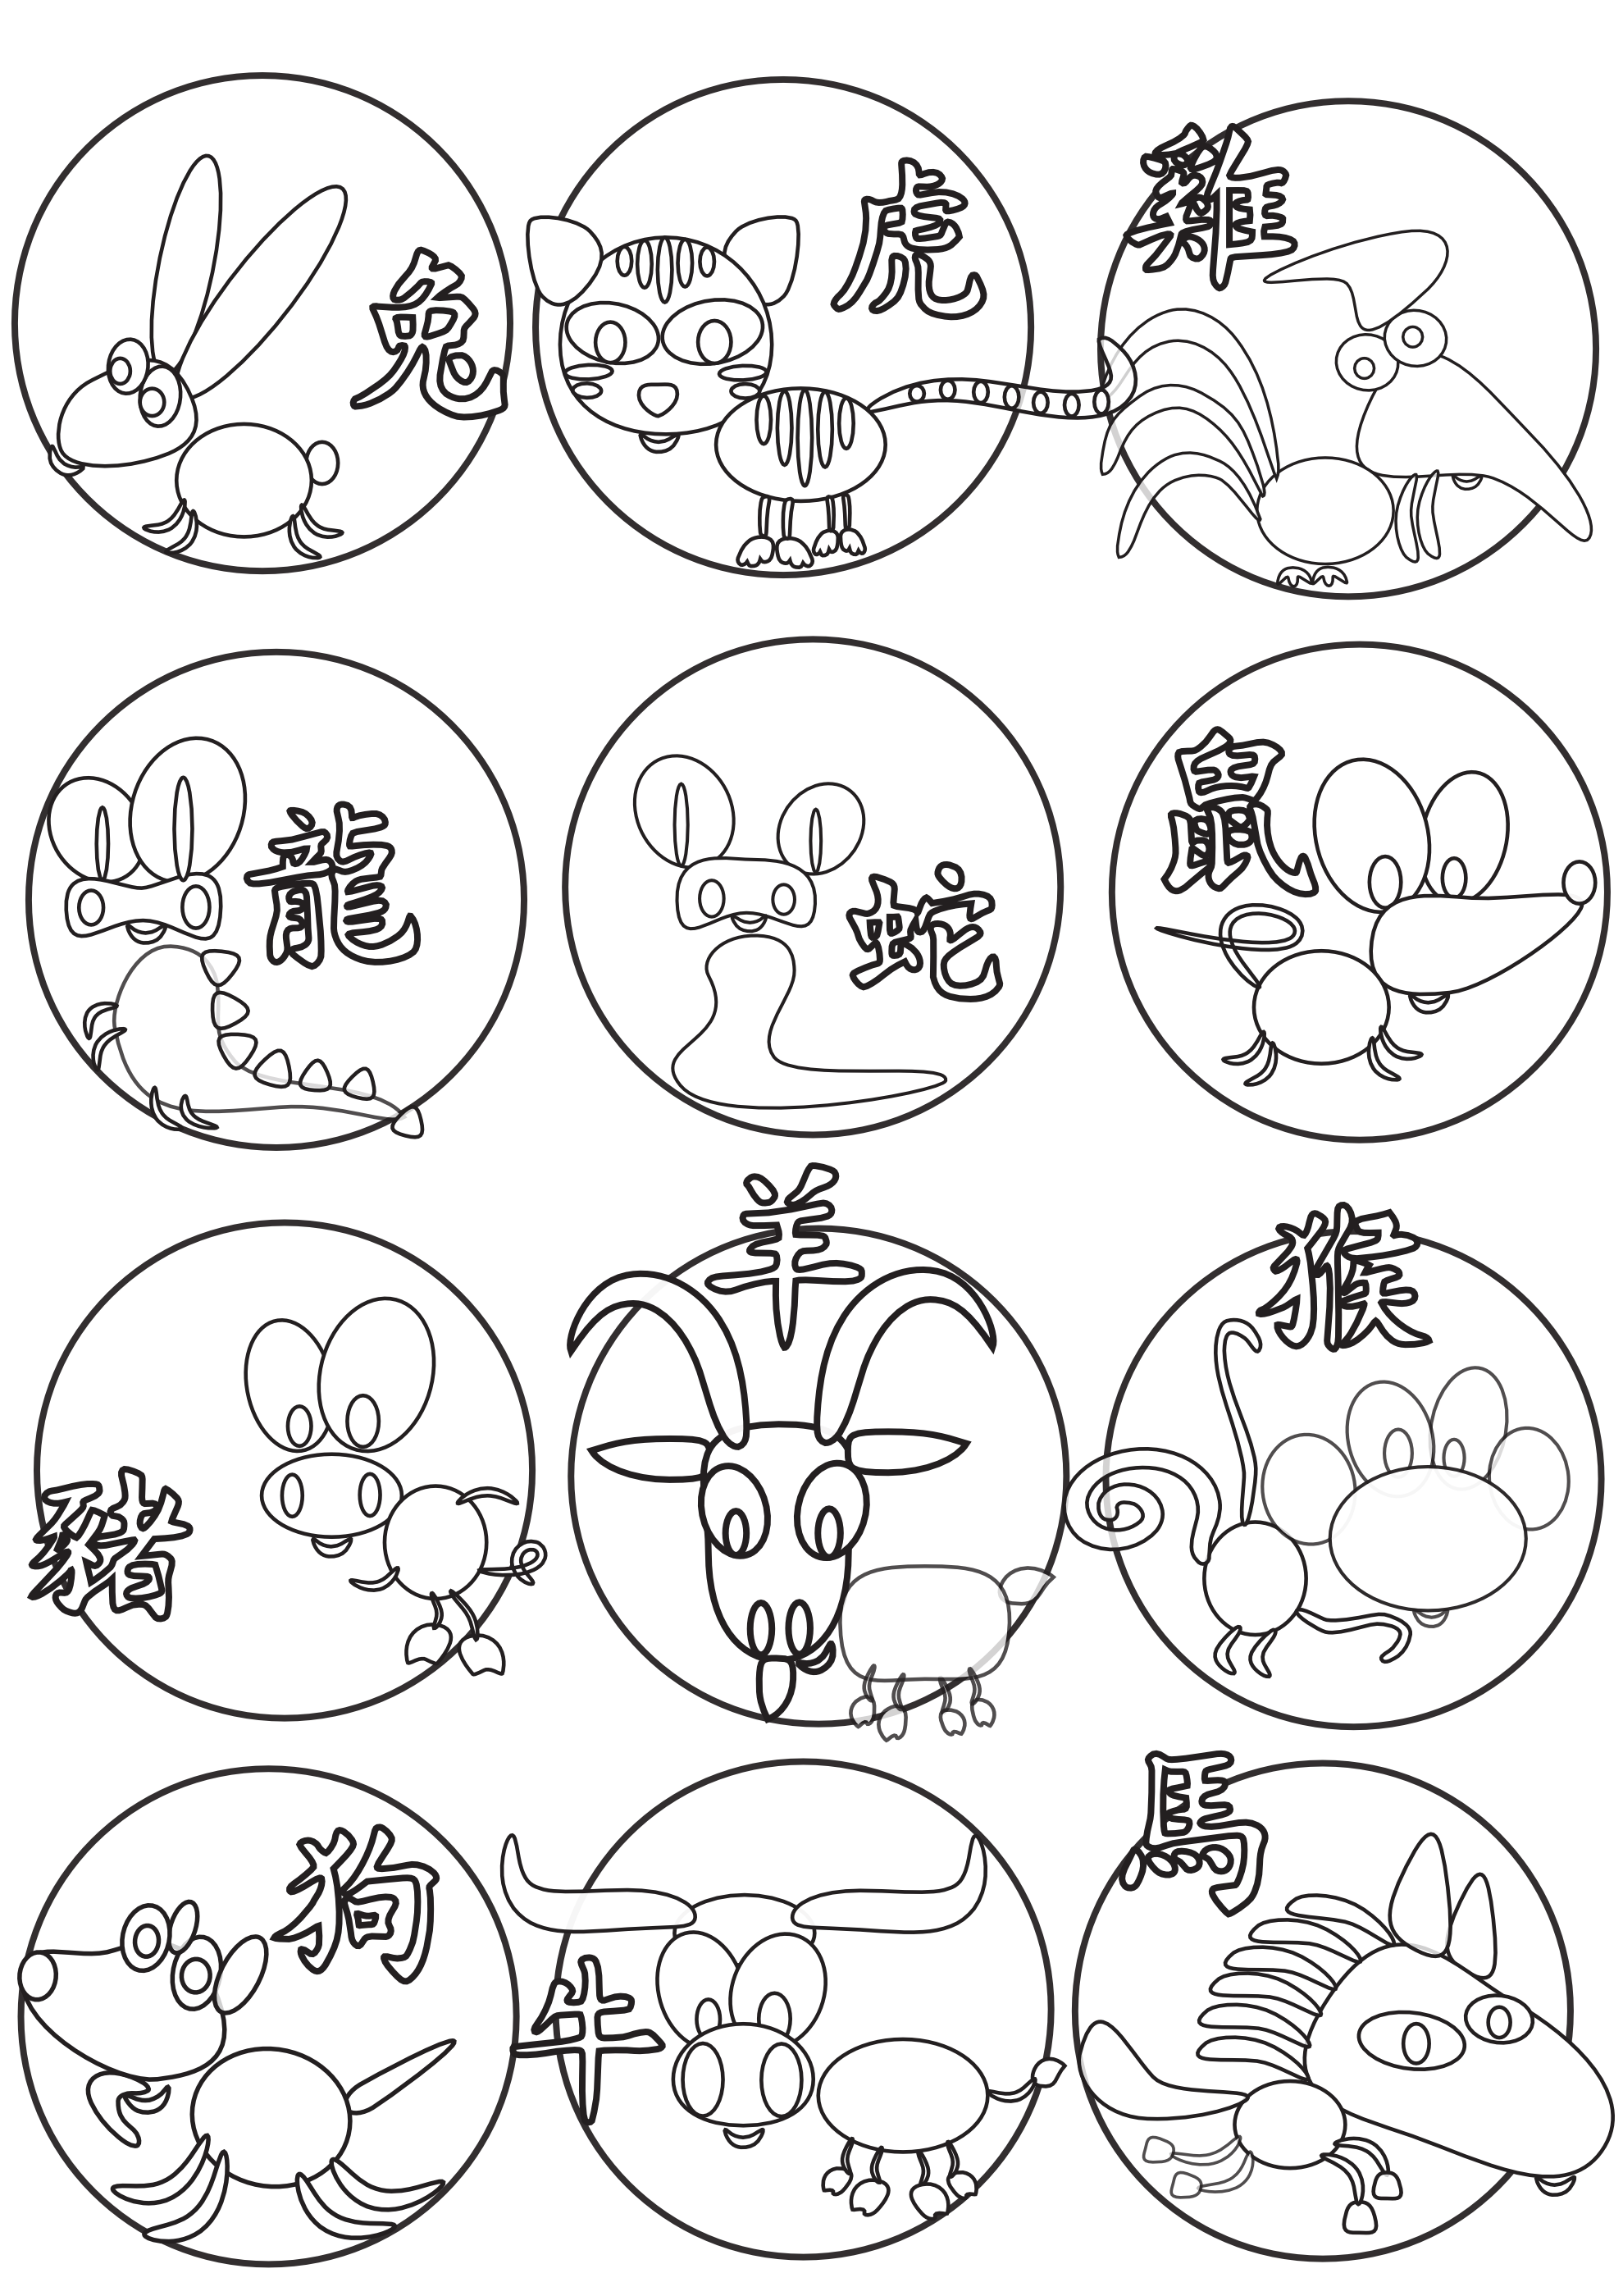 Chinese Animals Coloring Pages | Coloring Pages For All Ages